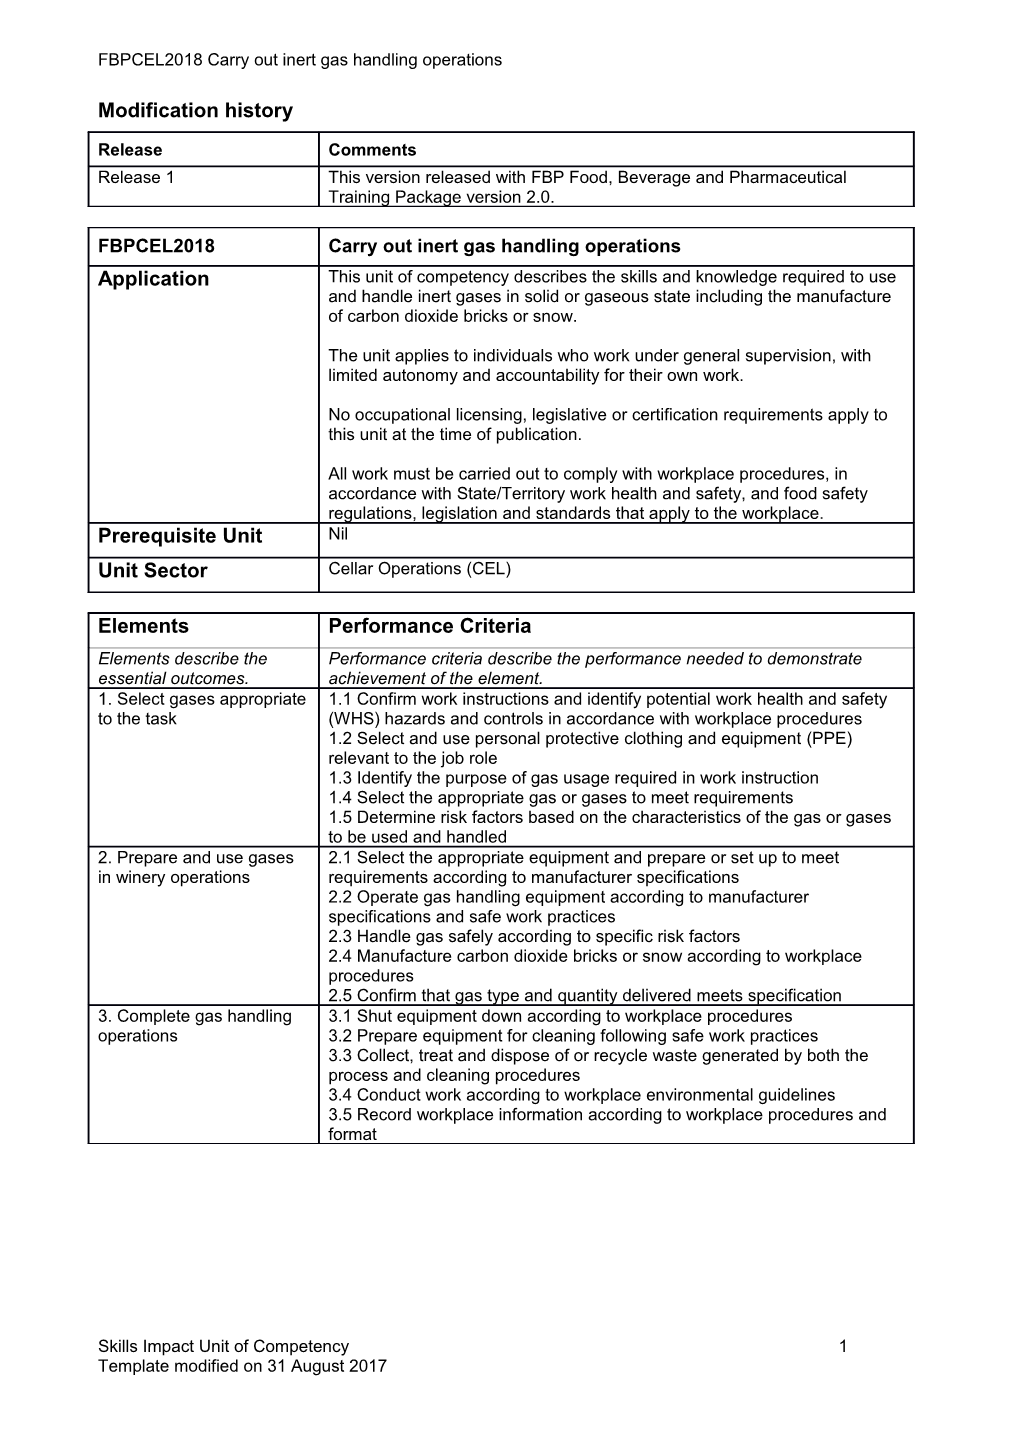 Skills Impact Unit of Competency Template s18